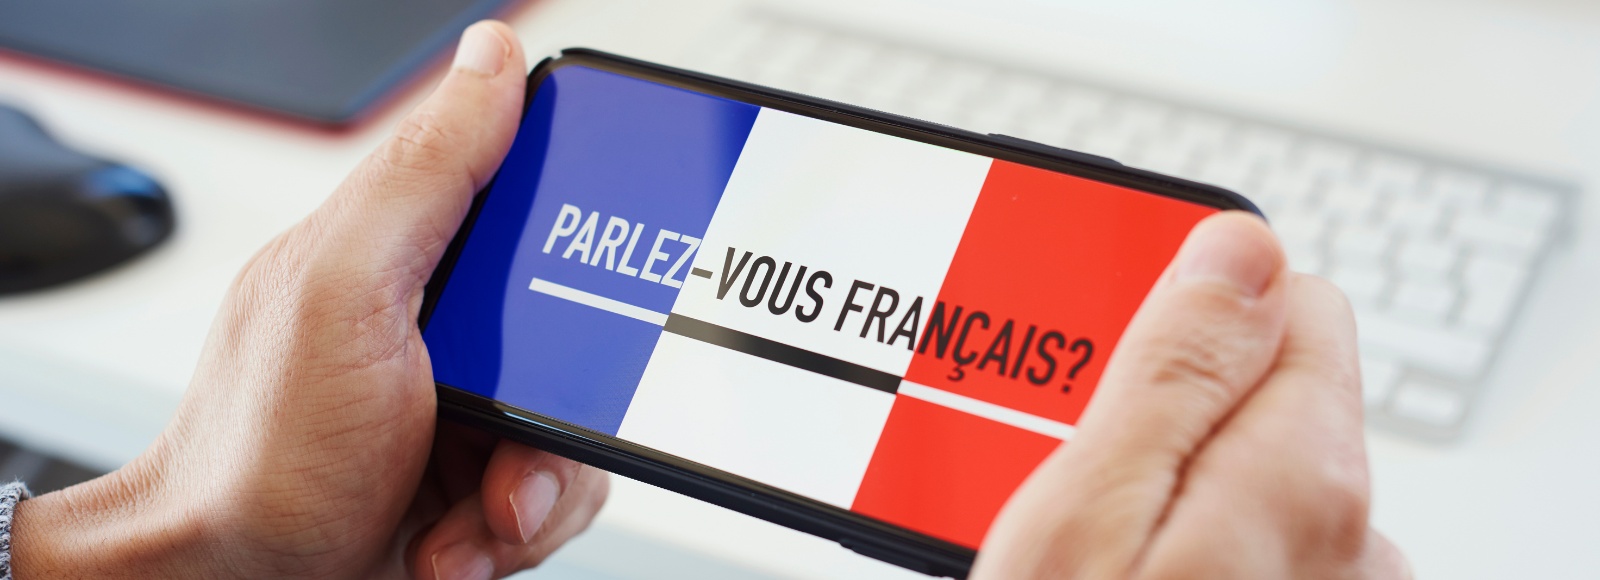 French language on a smartphone